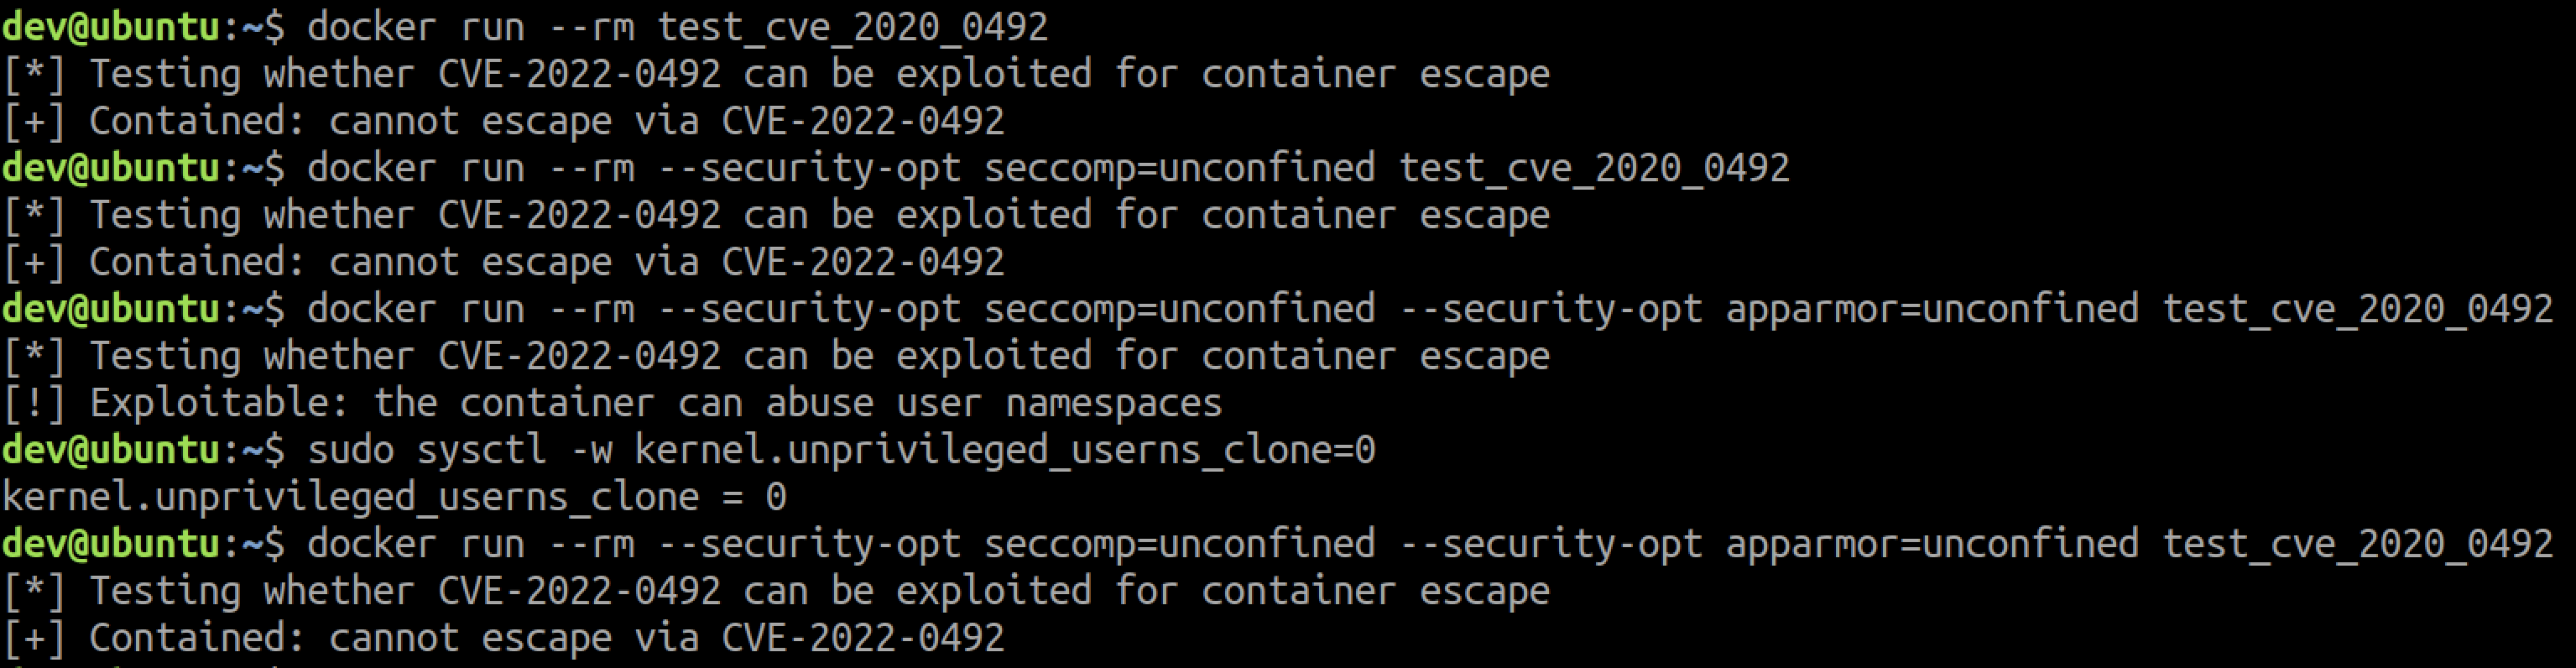 Using the script to test which container configurations can exploit CVE-2022-0492 to escape.